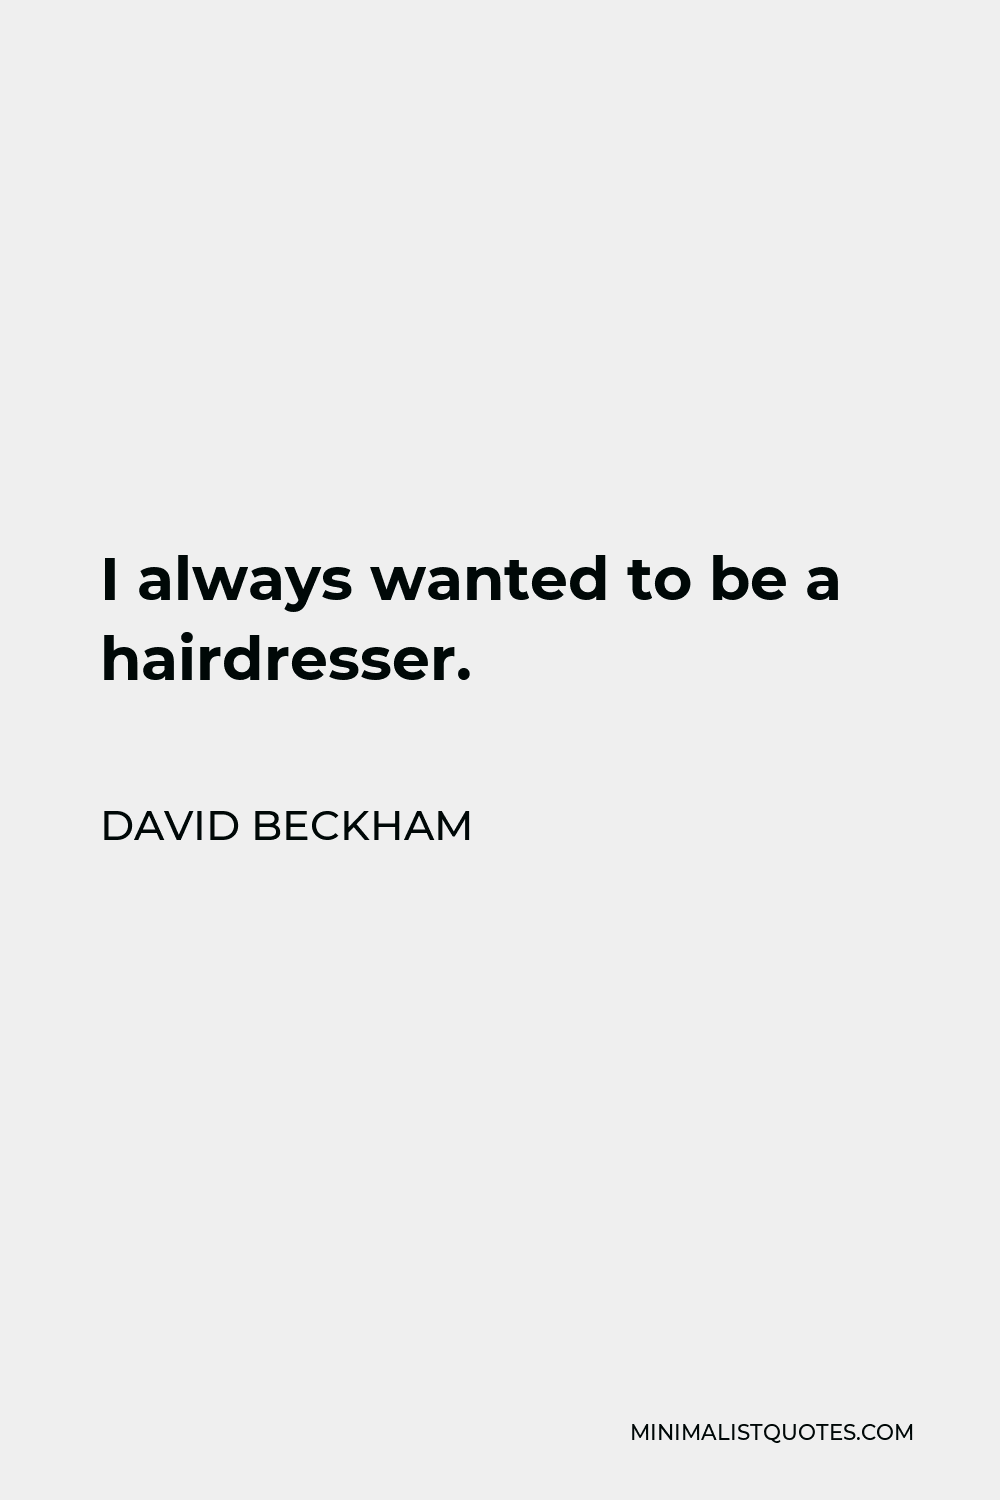 David Beckham Quote - I always wanted to be a hairdresser.